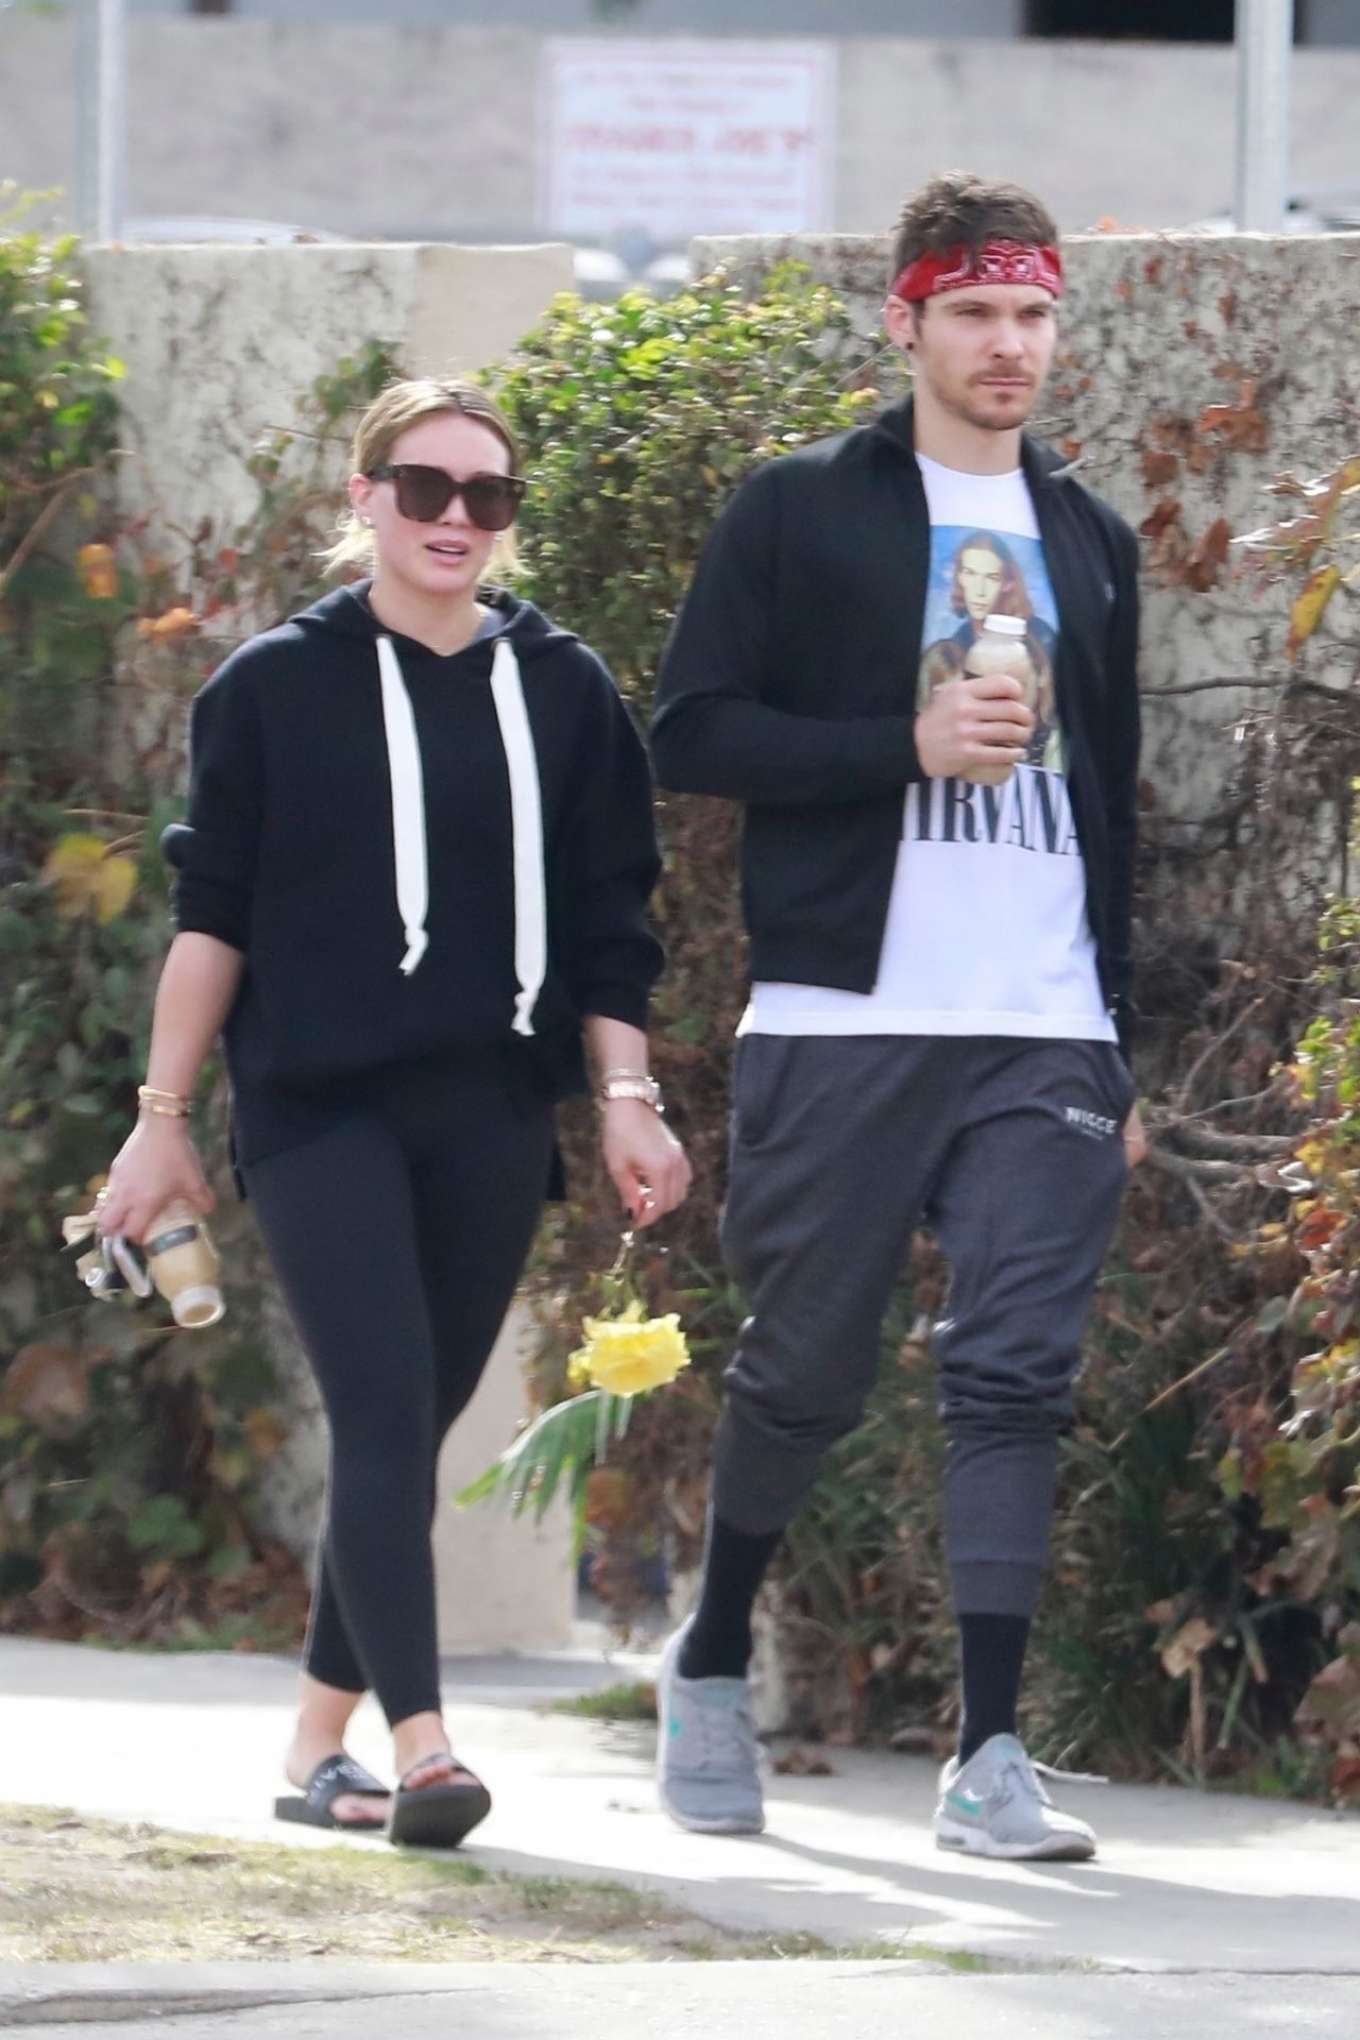 Hilary Duff and Matthew Koma - Out in Studio City